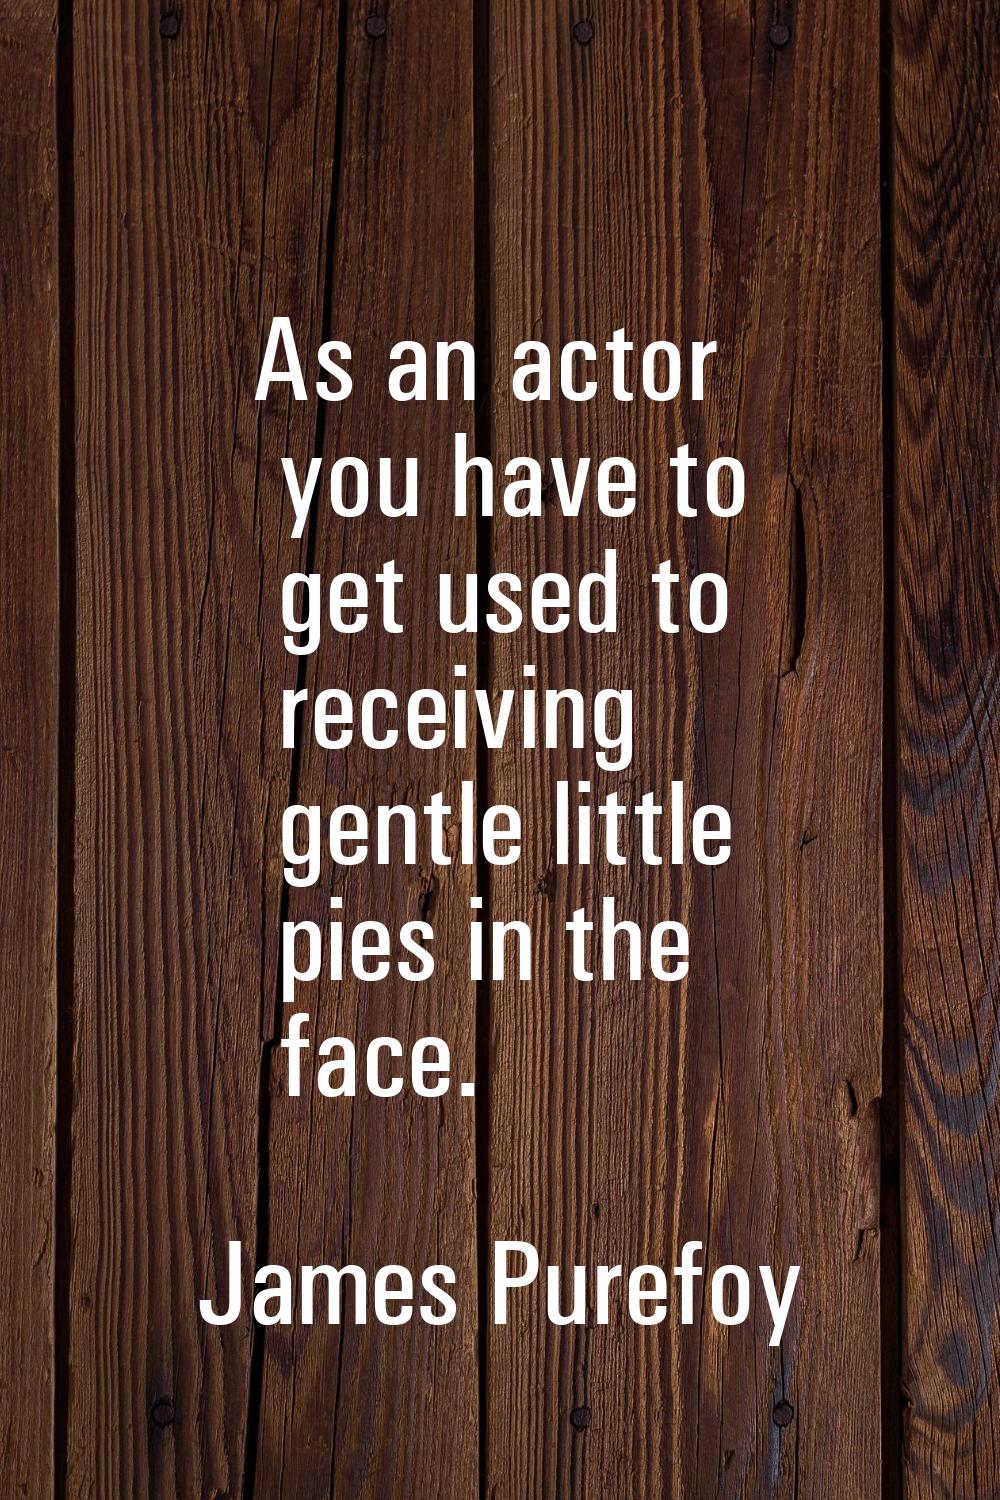 As an actor you have to get used to receiving gentle little pies in the face.